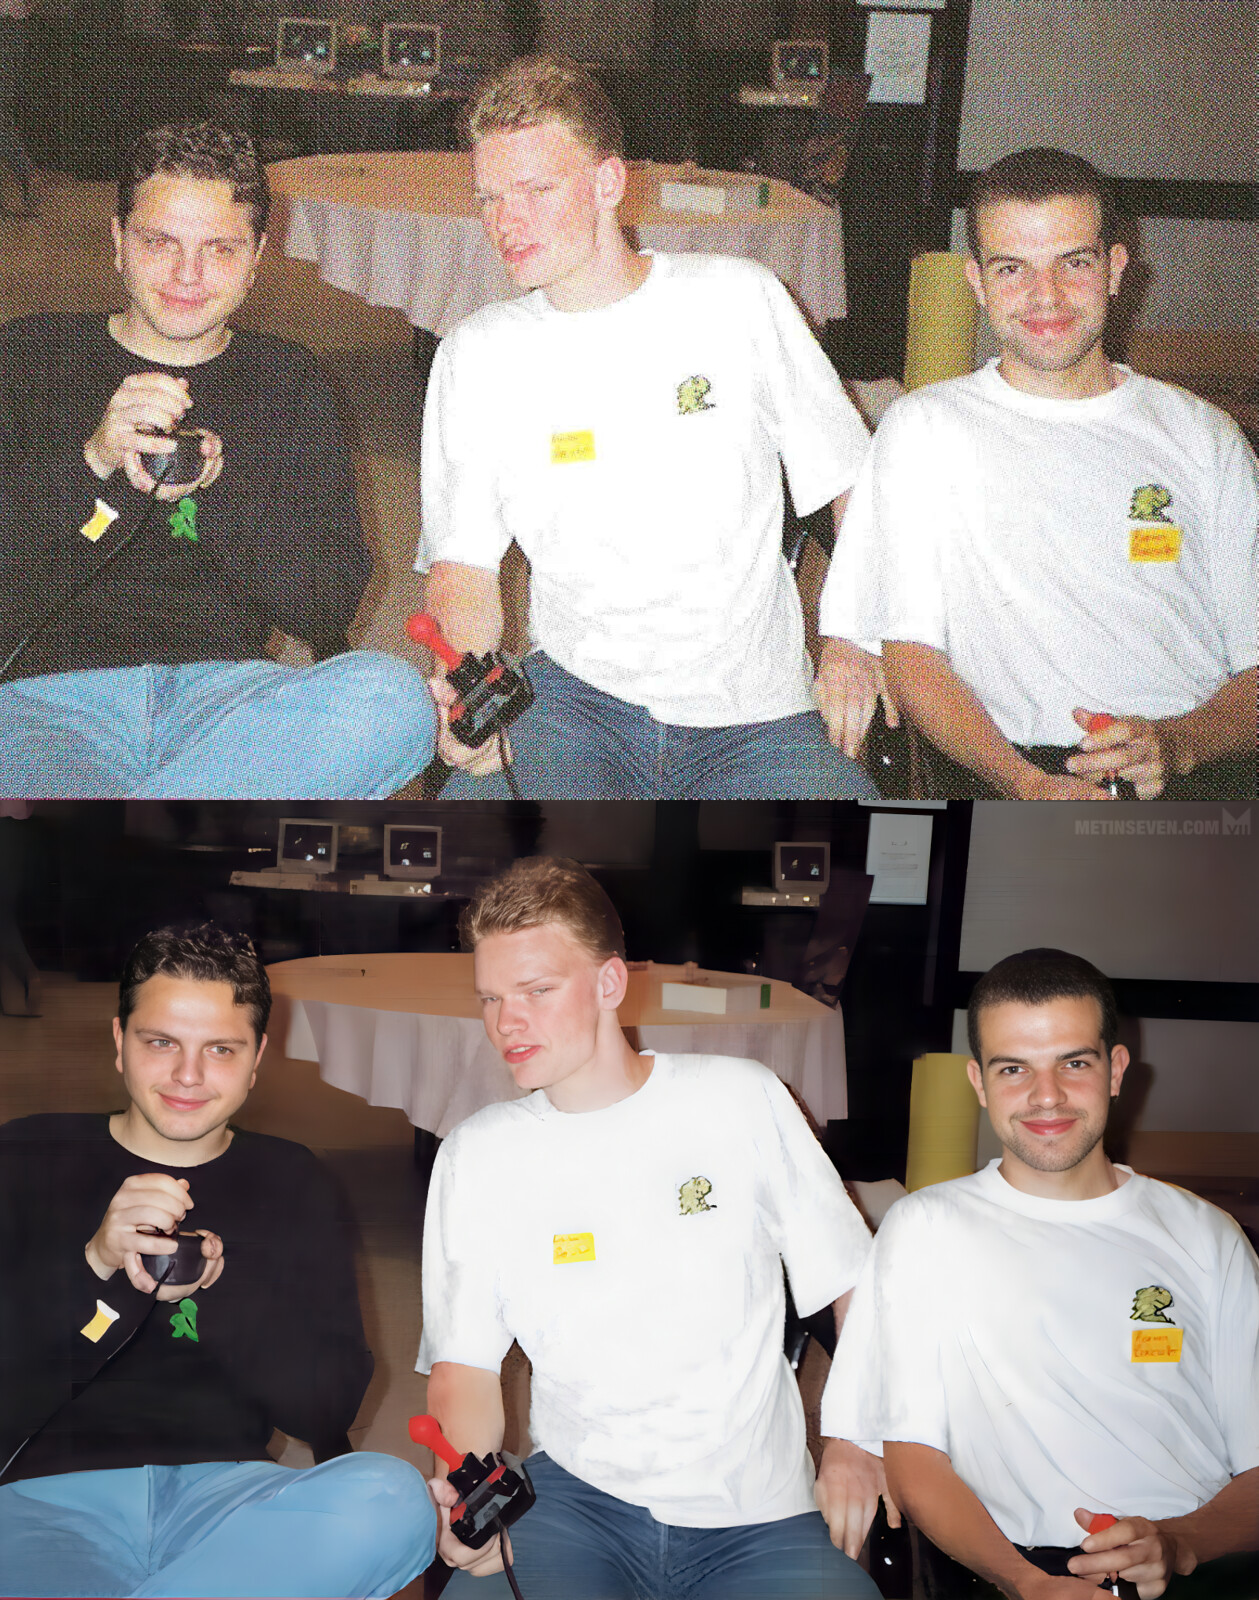 Restoration of a photo from a scanned old printed magazine page, featuring the Team Hoi Amiga game developers.